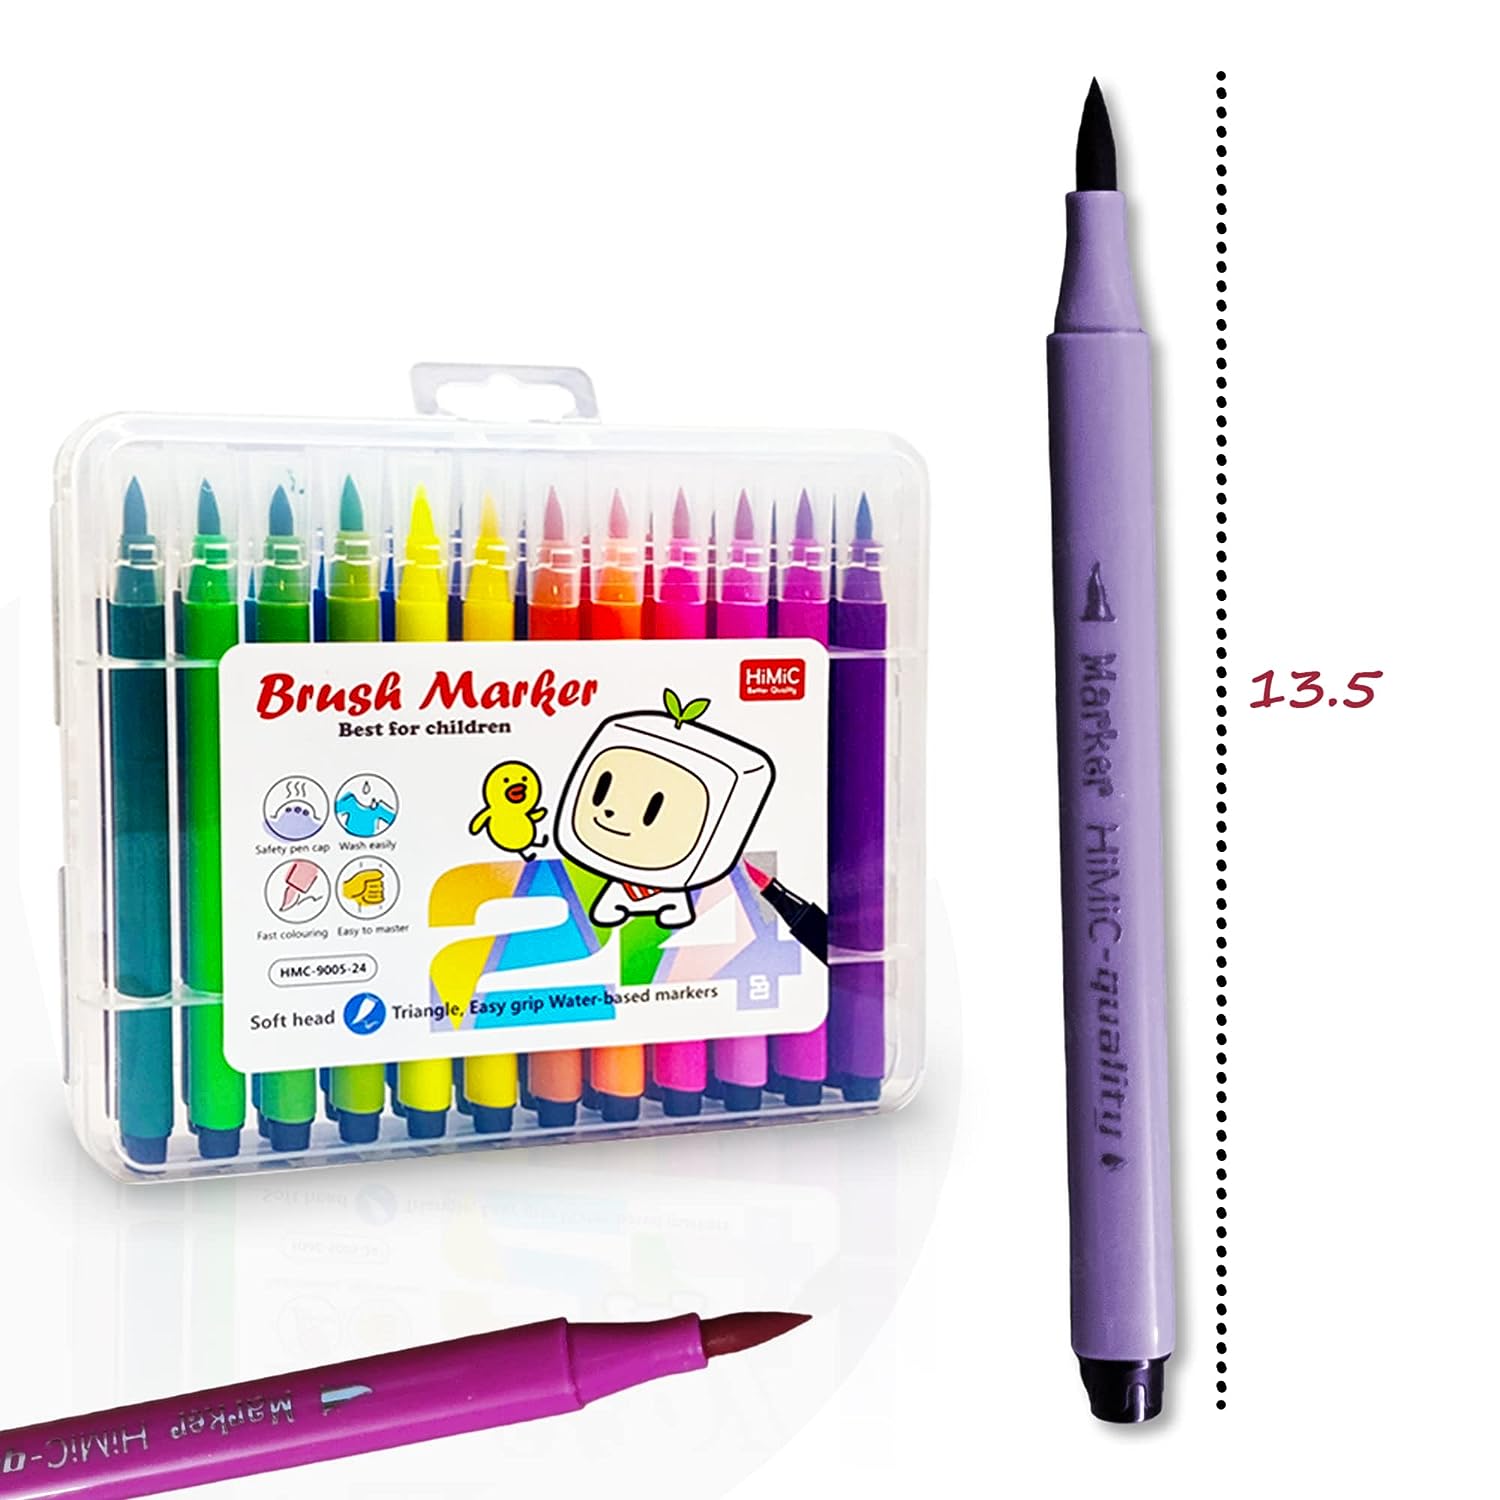 Pulsbery Art Markers Colour Sketch Pens - 48 Set Washable Watercolor Pens  Set Nib Sketch Pens with Washable Ink - Sketch pen For Kids, Drawing Pens -  valleyresorts.co.uk